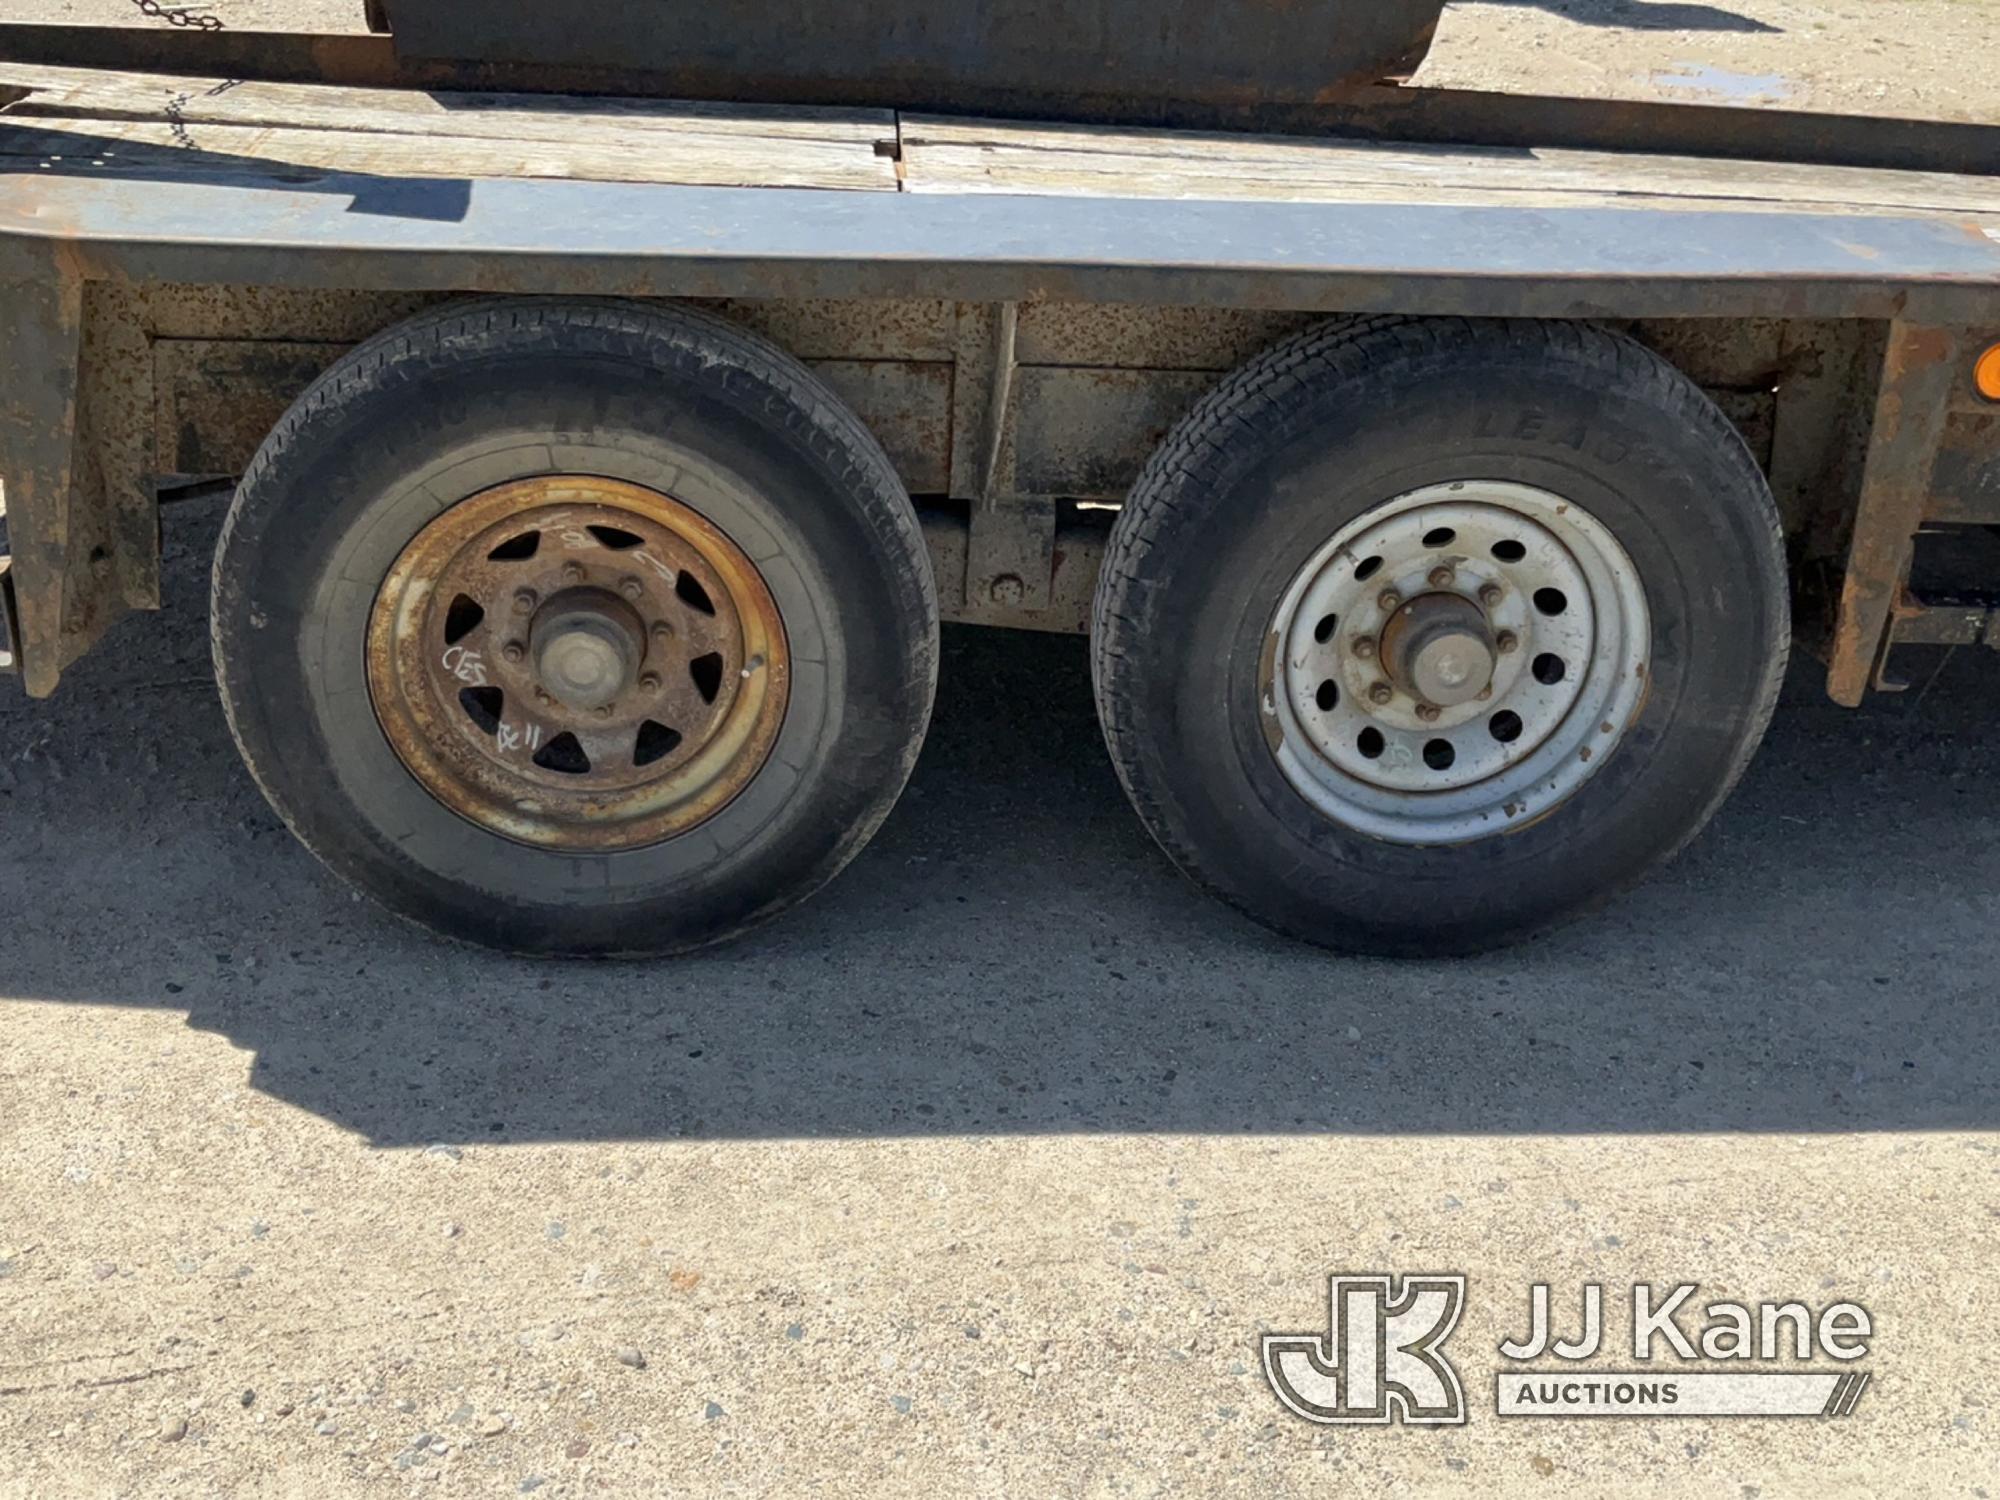 (Charlotte, MI) 2001 Belshe Industries T/A Tagalong Utility Trailer Rust, Body Damage